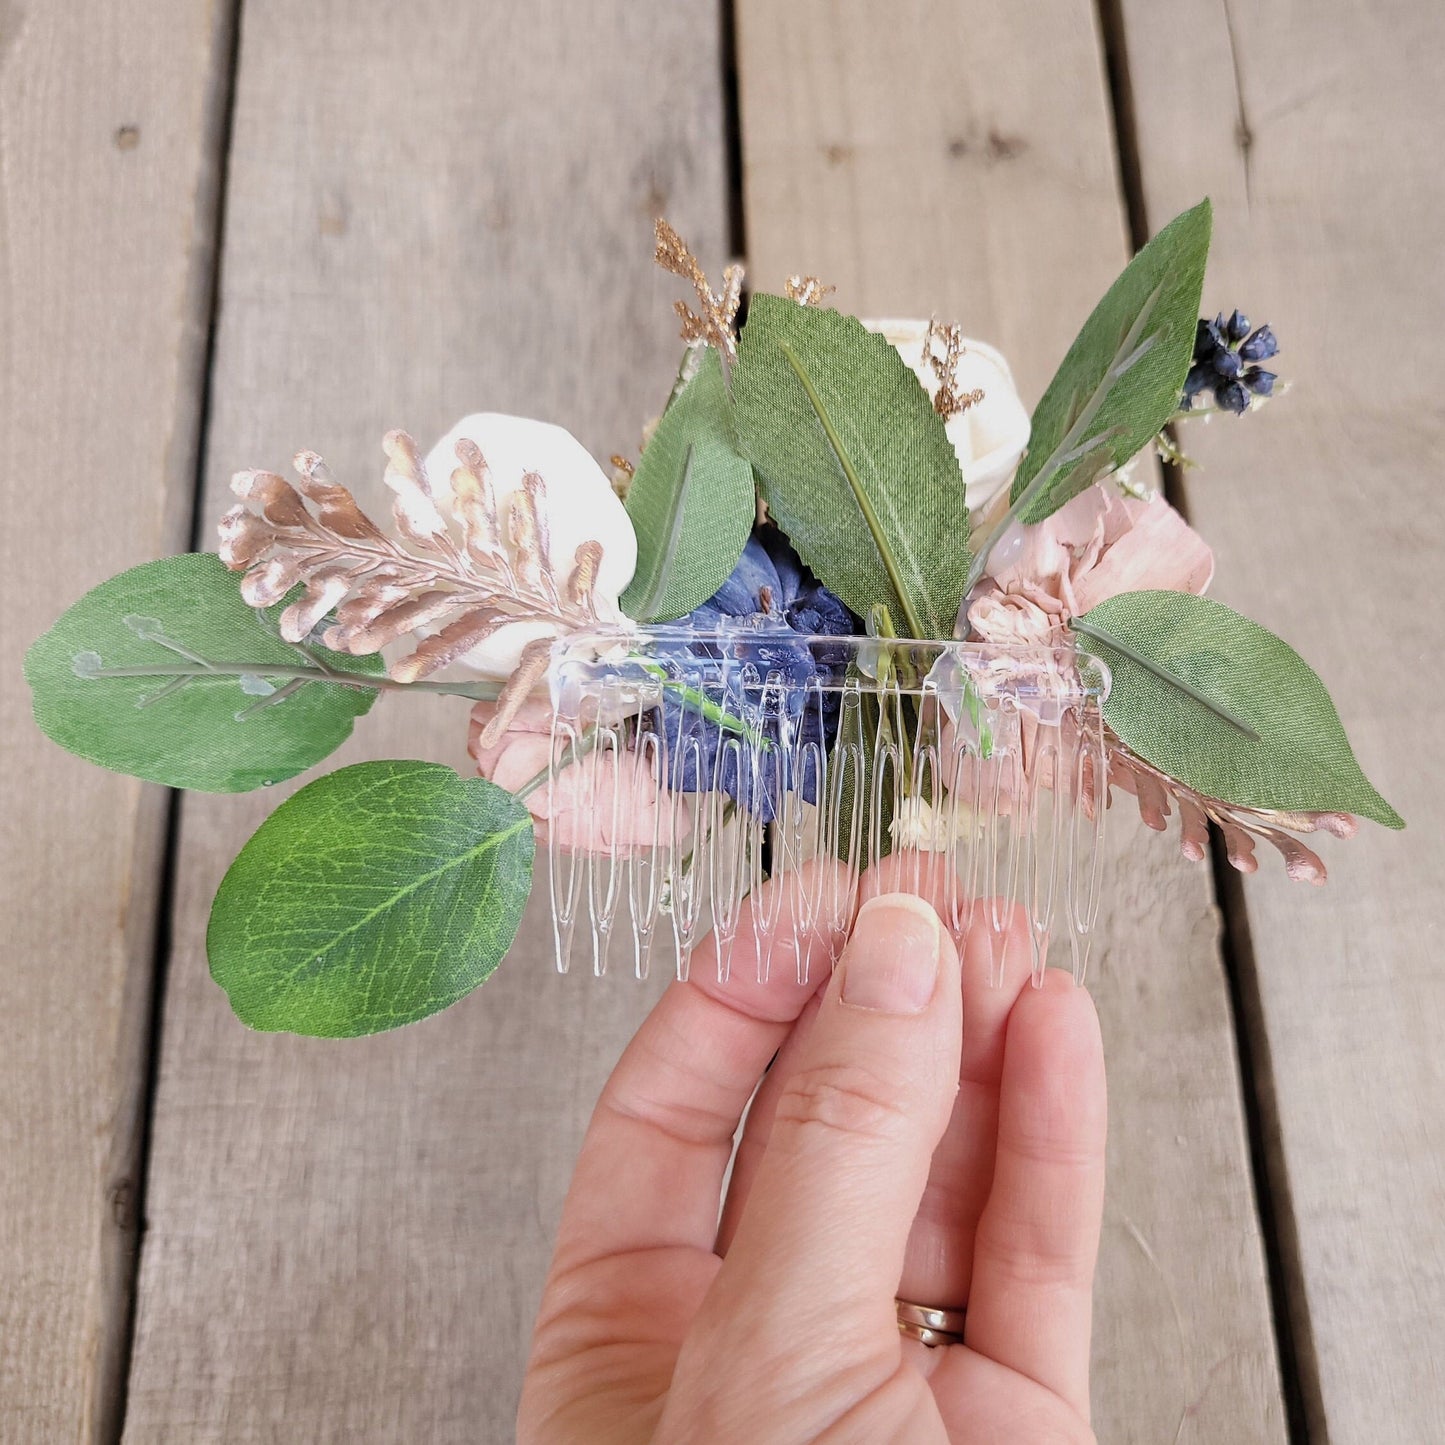 Bridal Hair Comb for Wedding Updo, Sola Wood Flowers Hair Piece, Navy and Blush Wedding Flowers